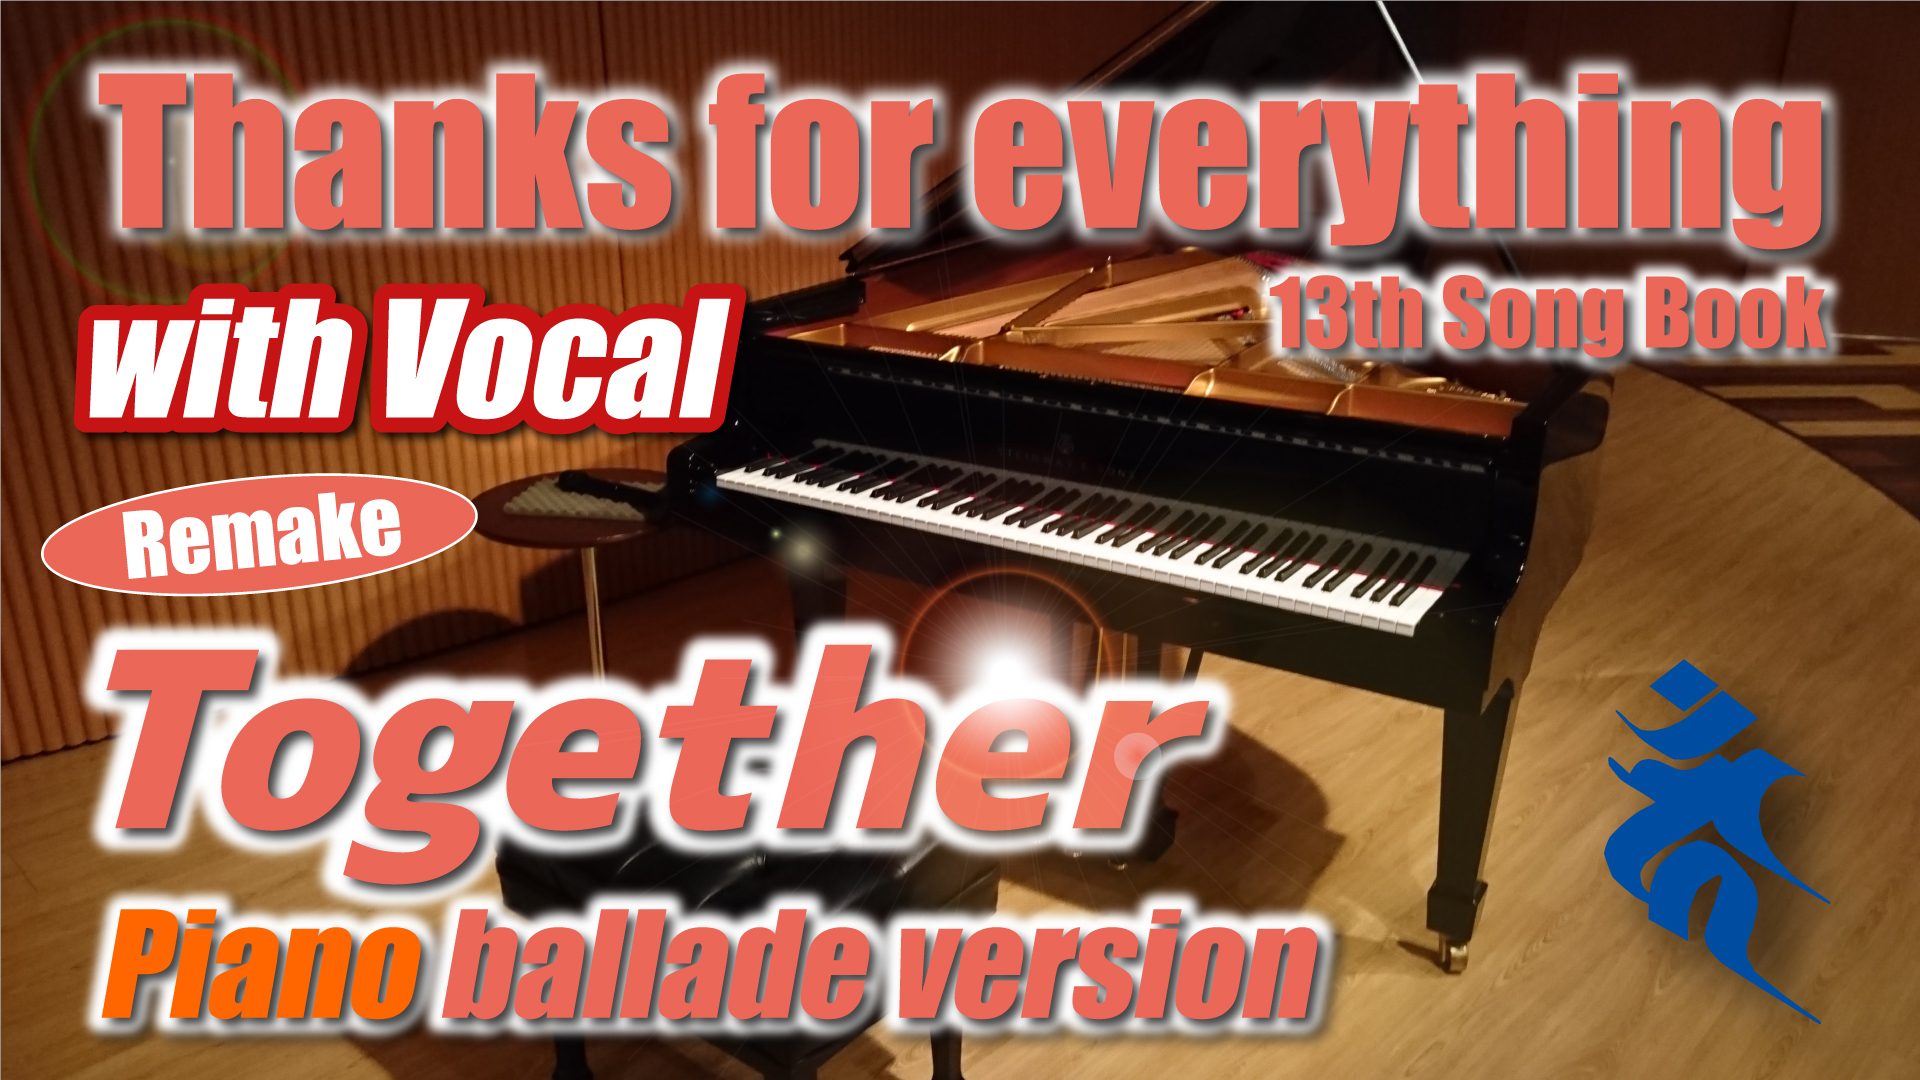 【Together】仮歌 with Vocal part ｜【Thanks For Everything】13thSongBook